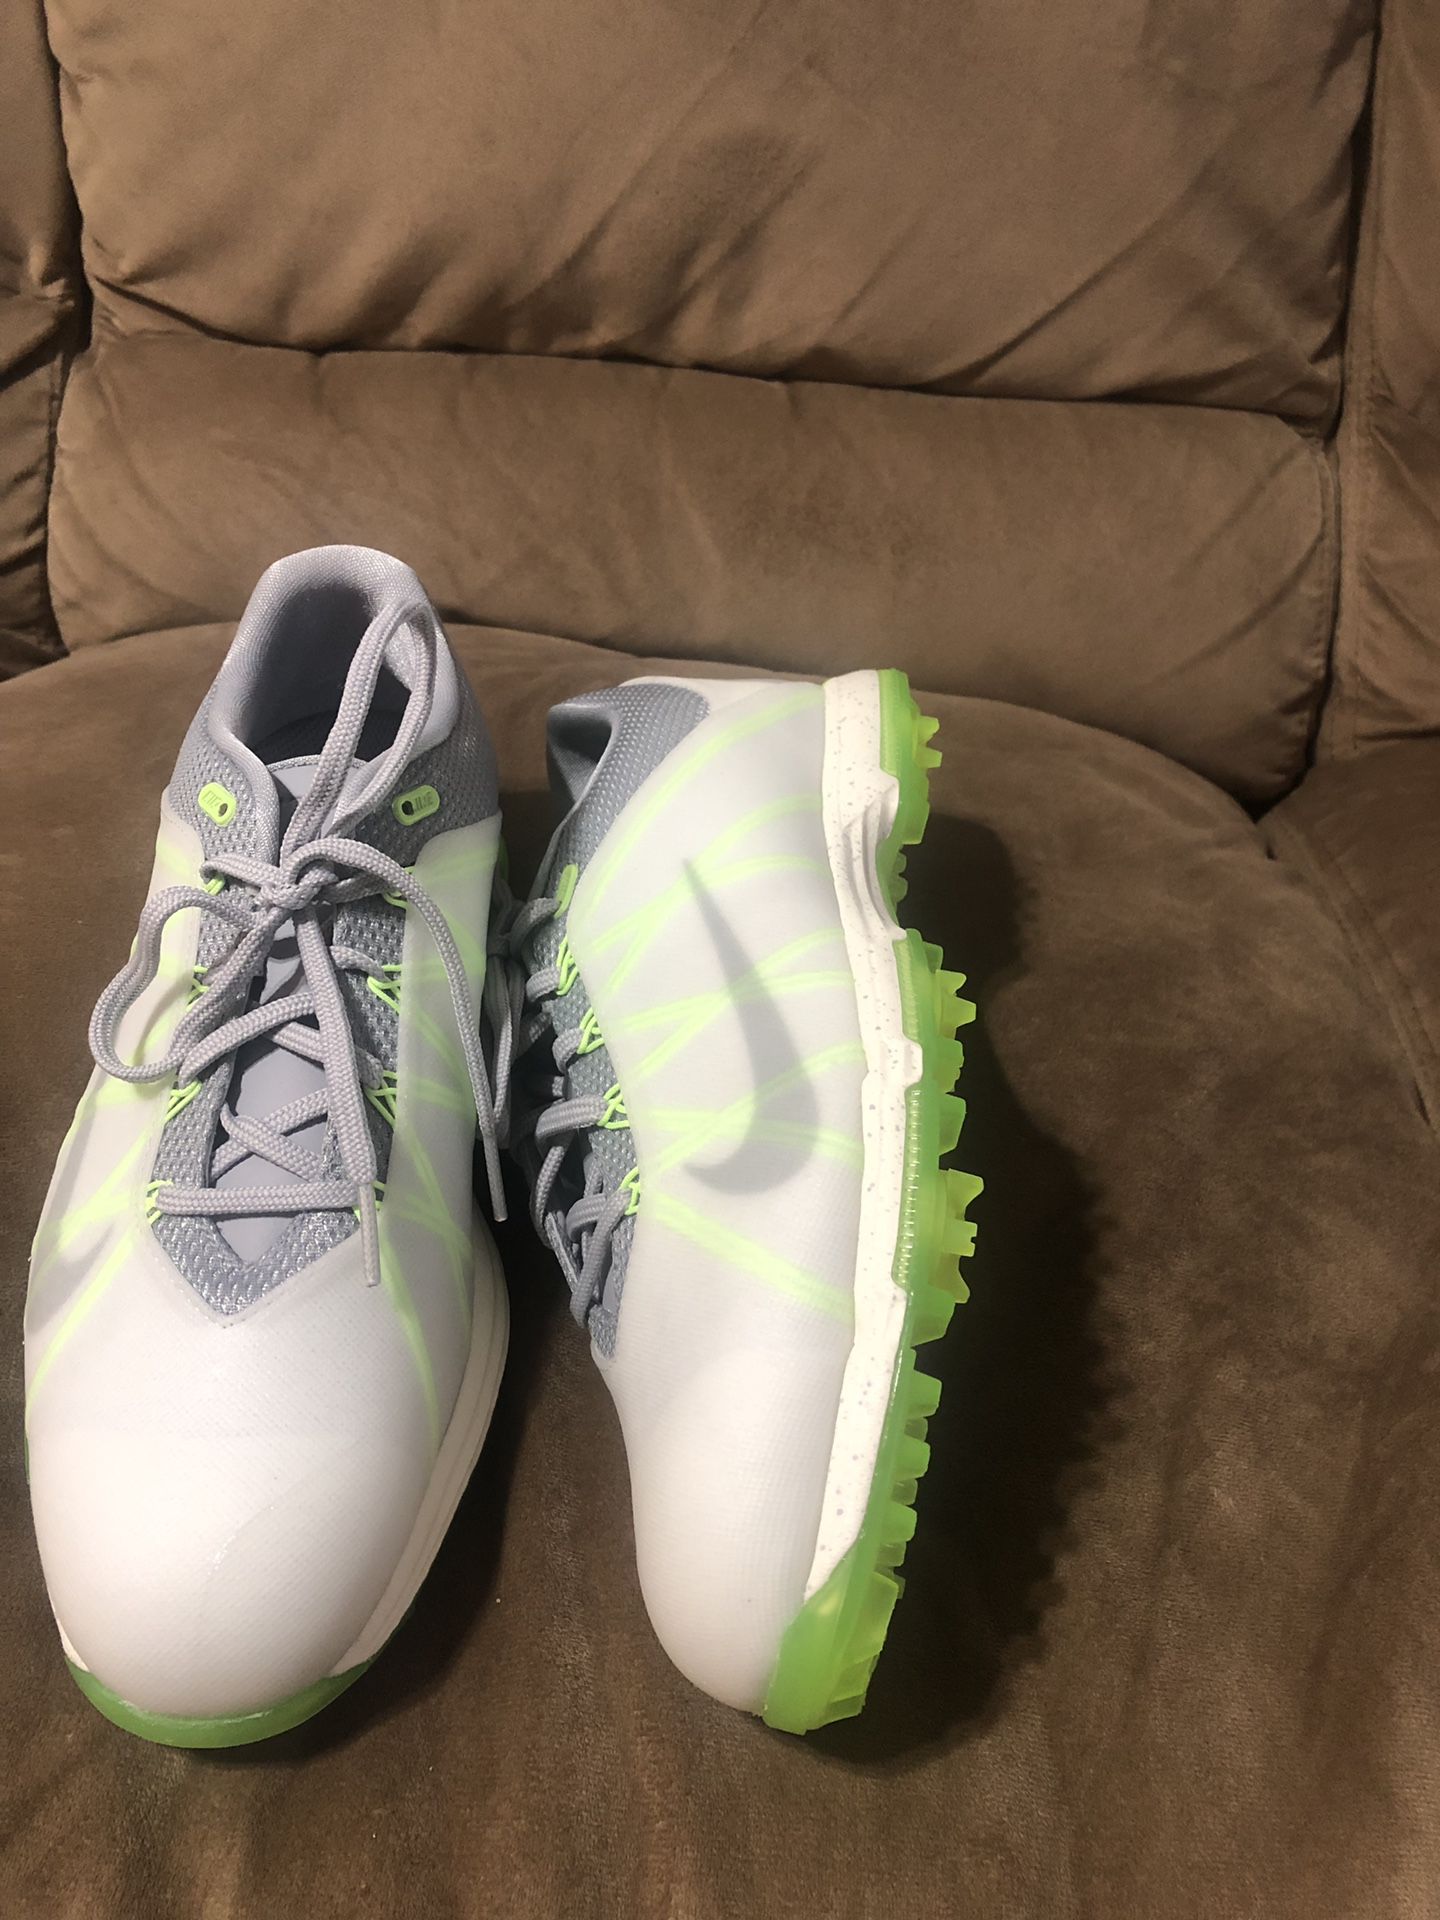 New golf shoes